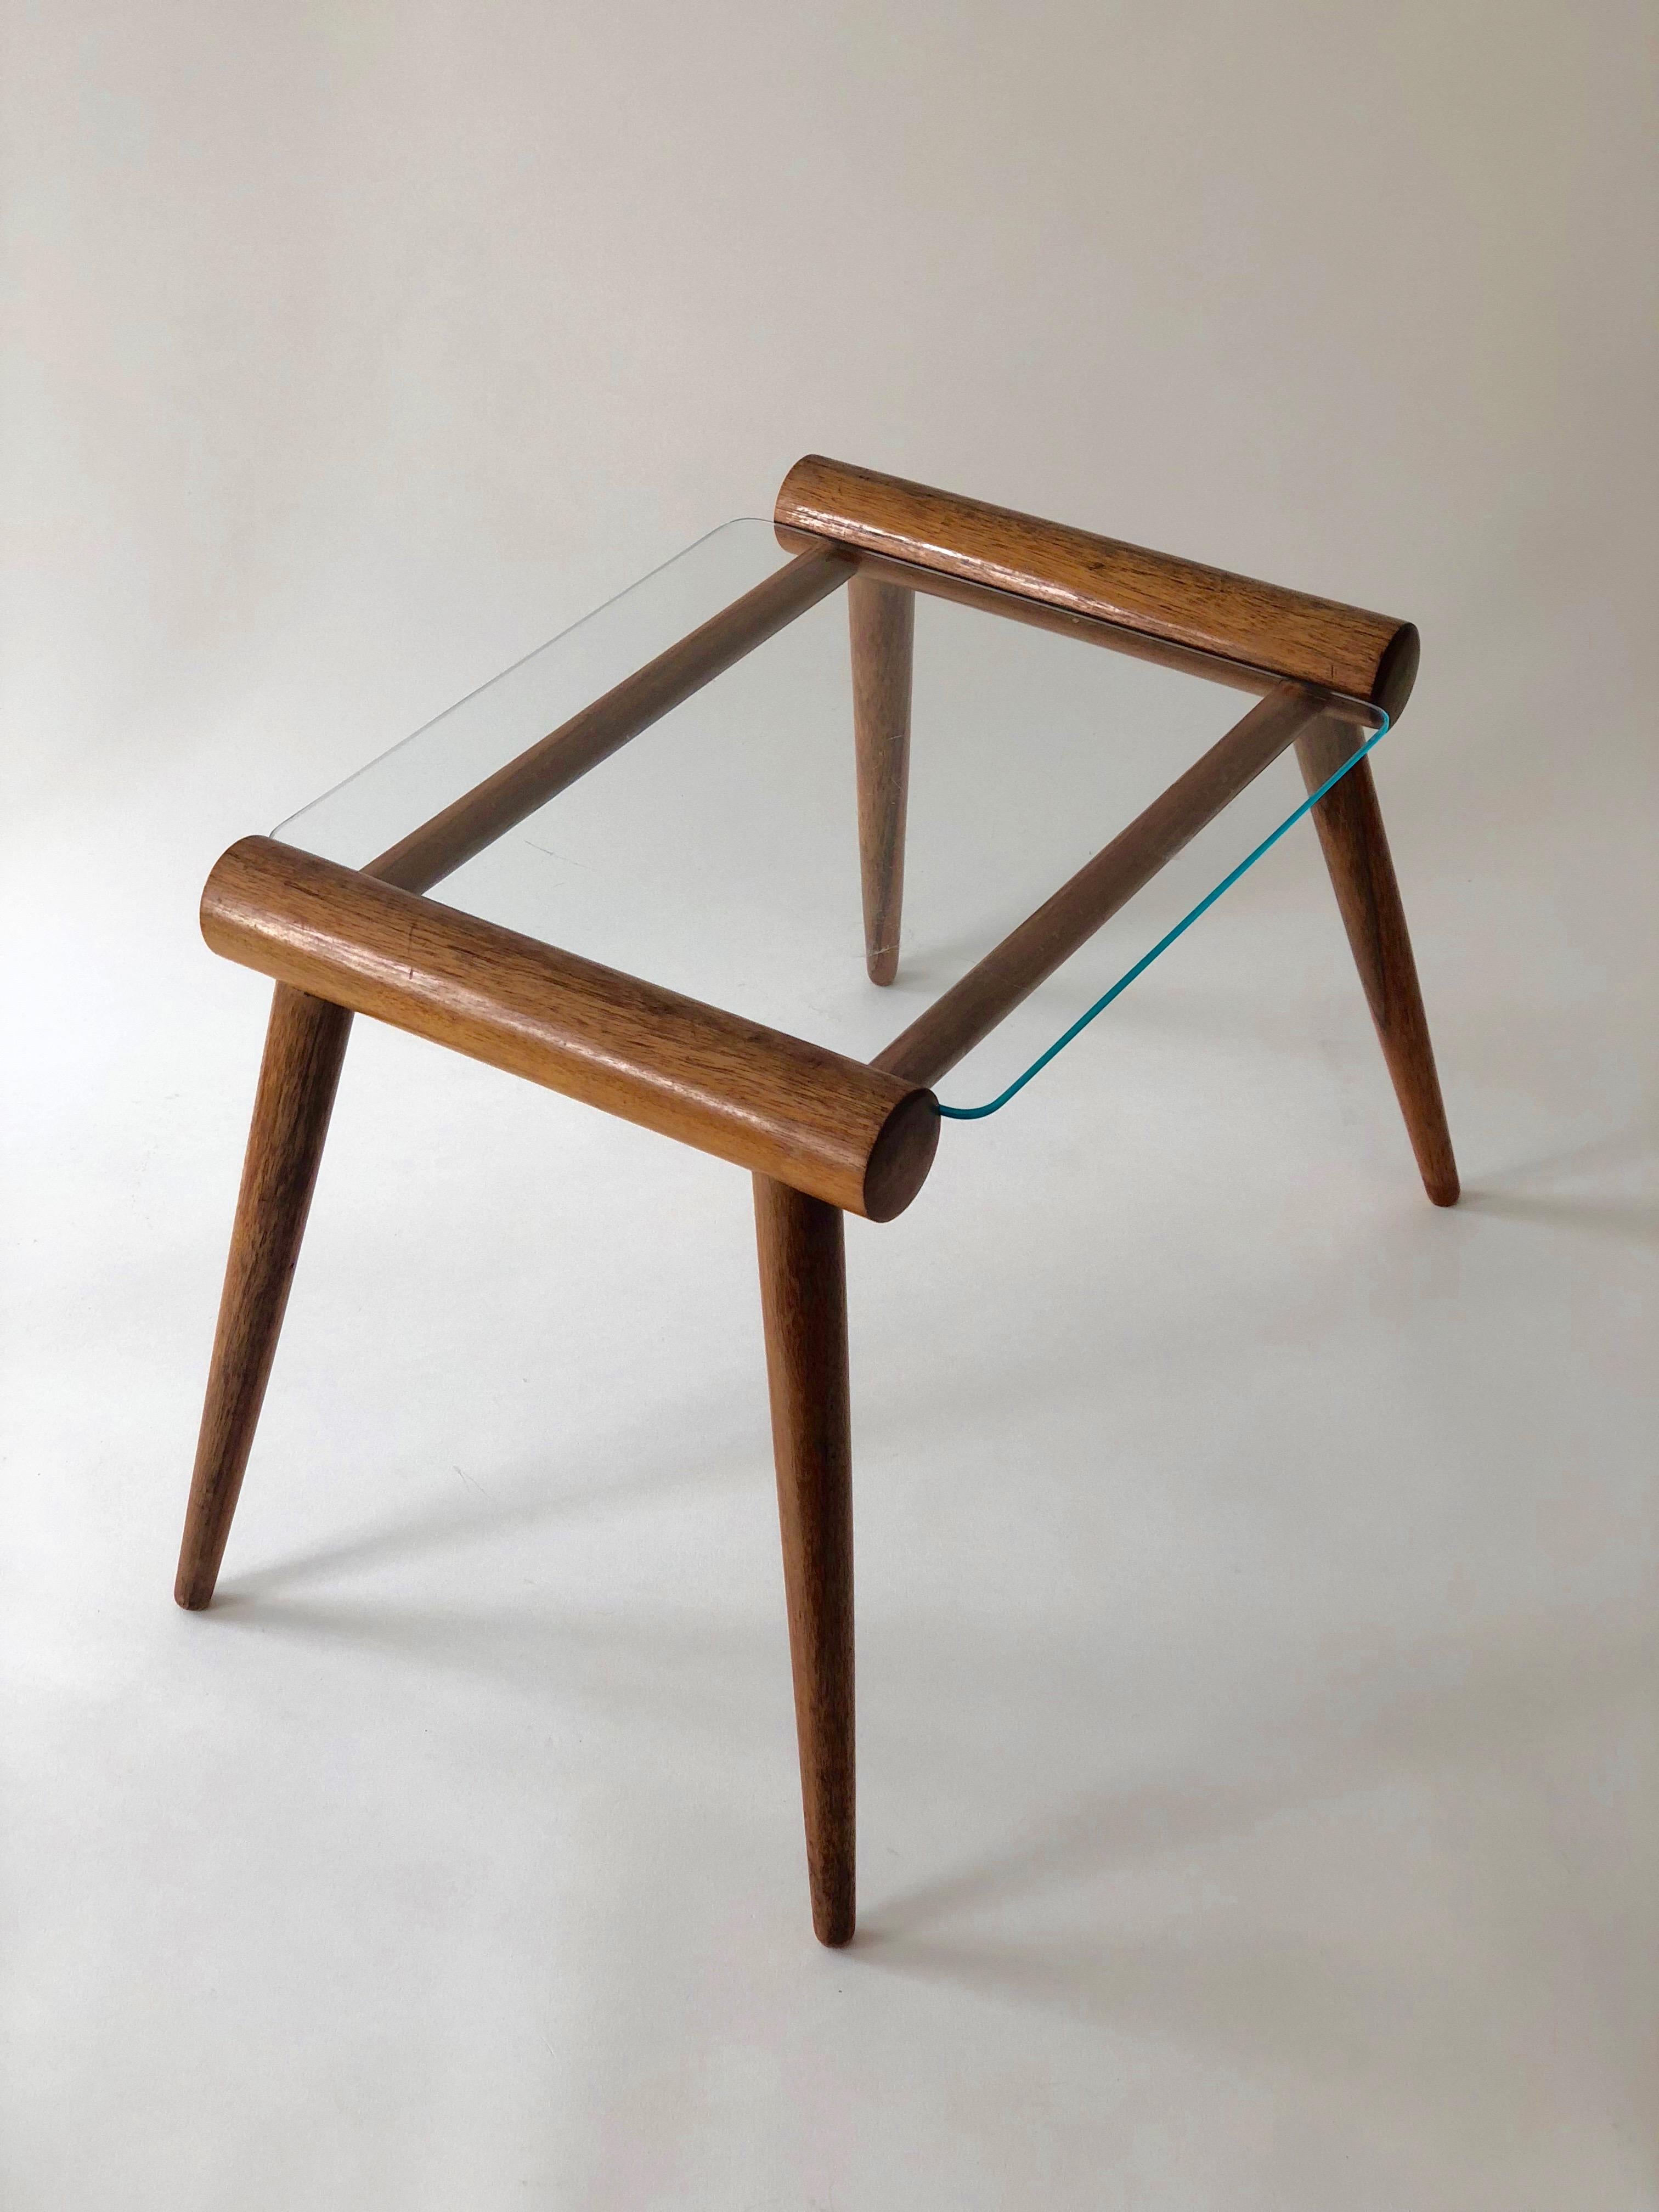 20th Century Austrian Midcentury Small Table in Wood with Glass Plate from Max Kment, 1950 For Sale